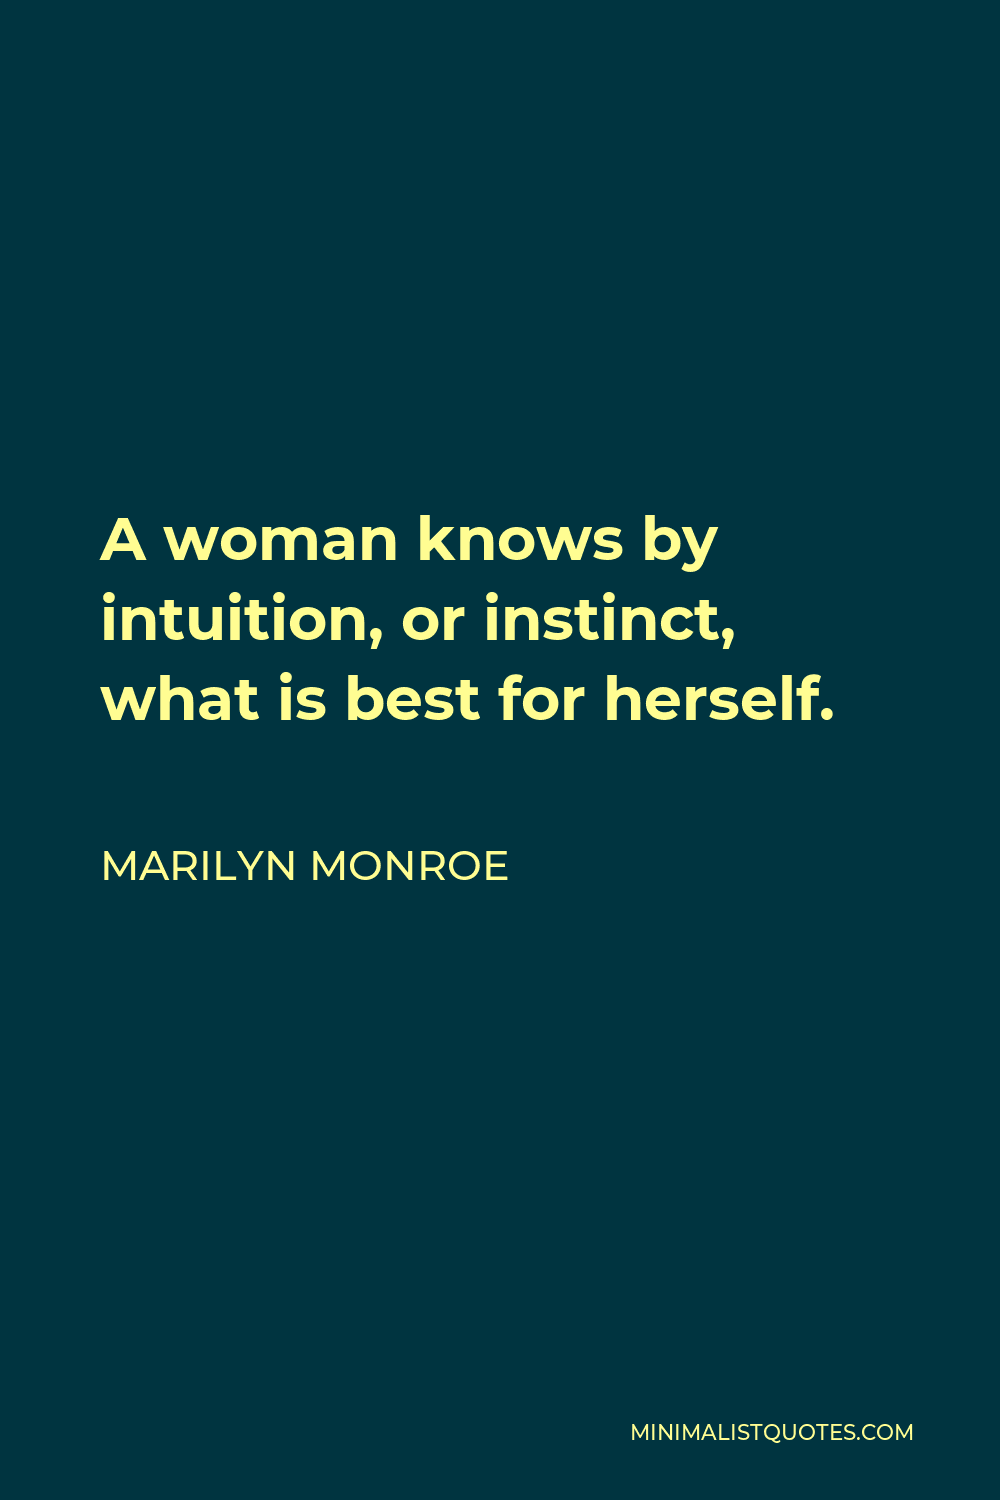 Marilyn Monroe Quote - A woman knows by intuition, or instinct, what is best for herself.